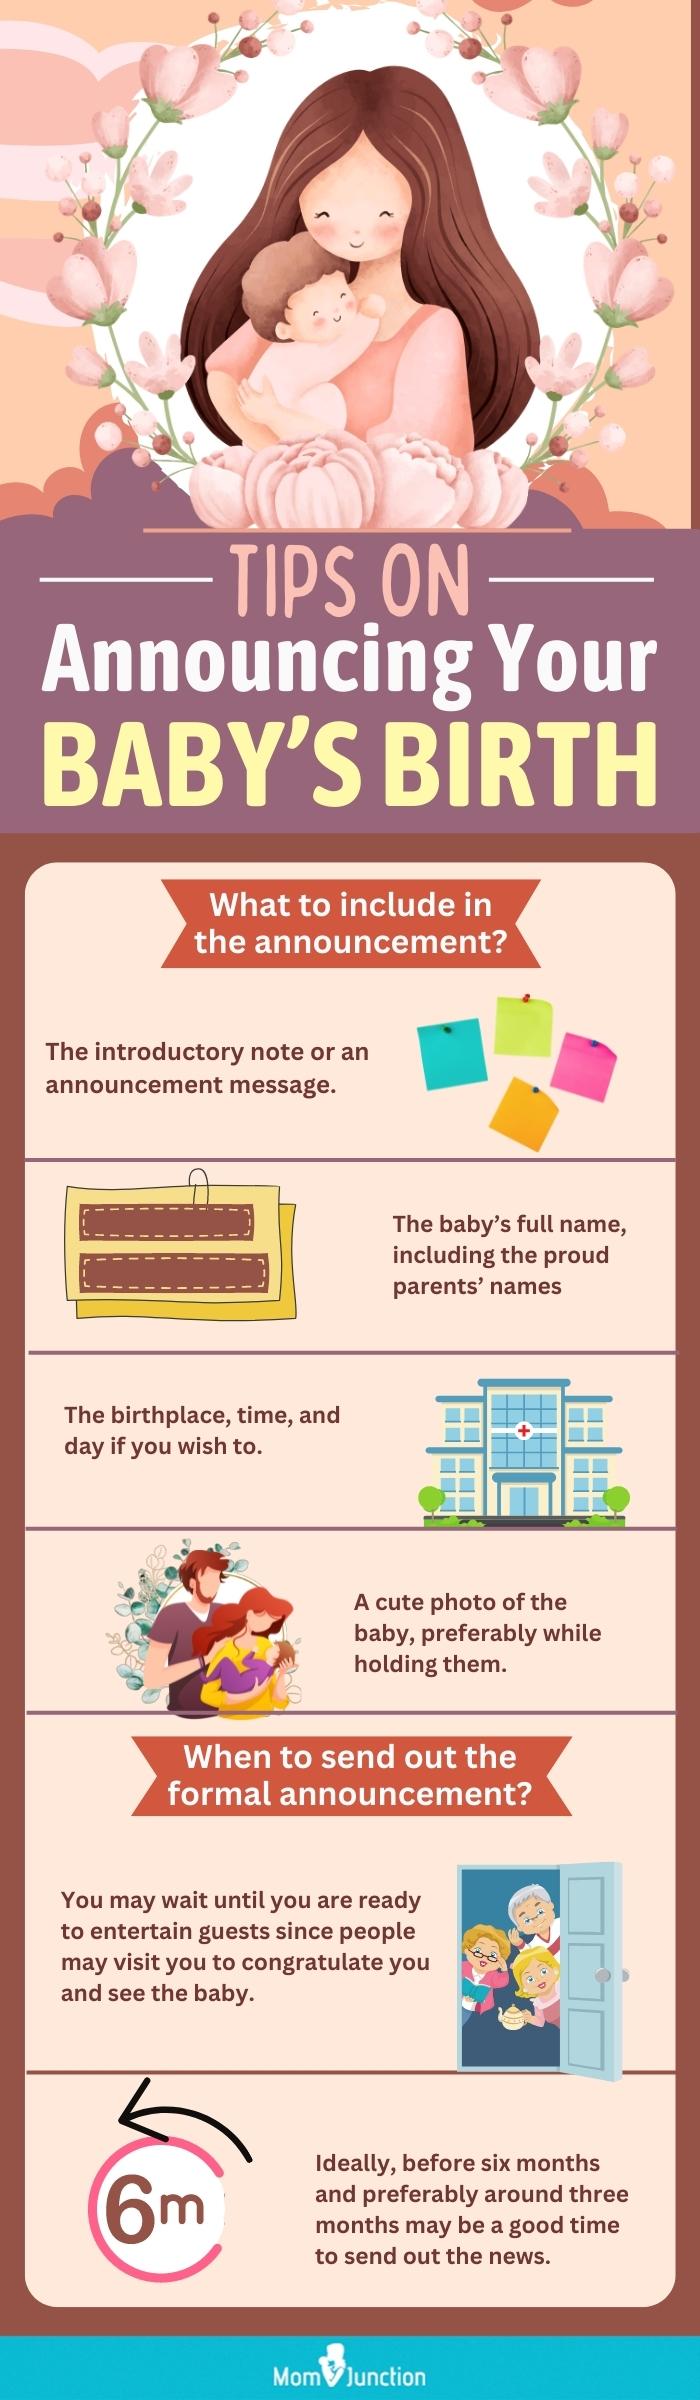 tips on announcing your baby birth (infographic)